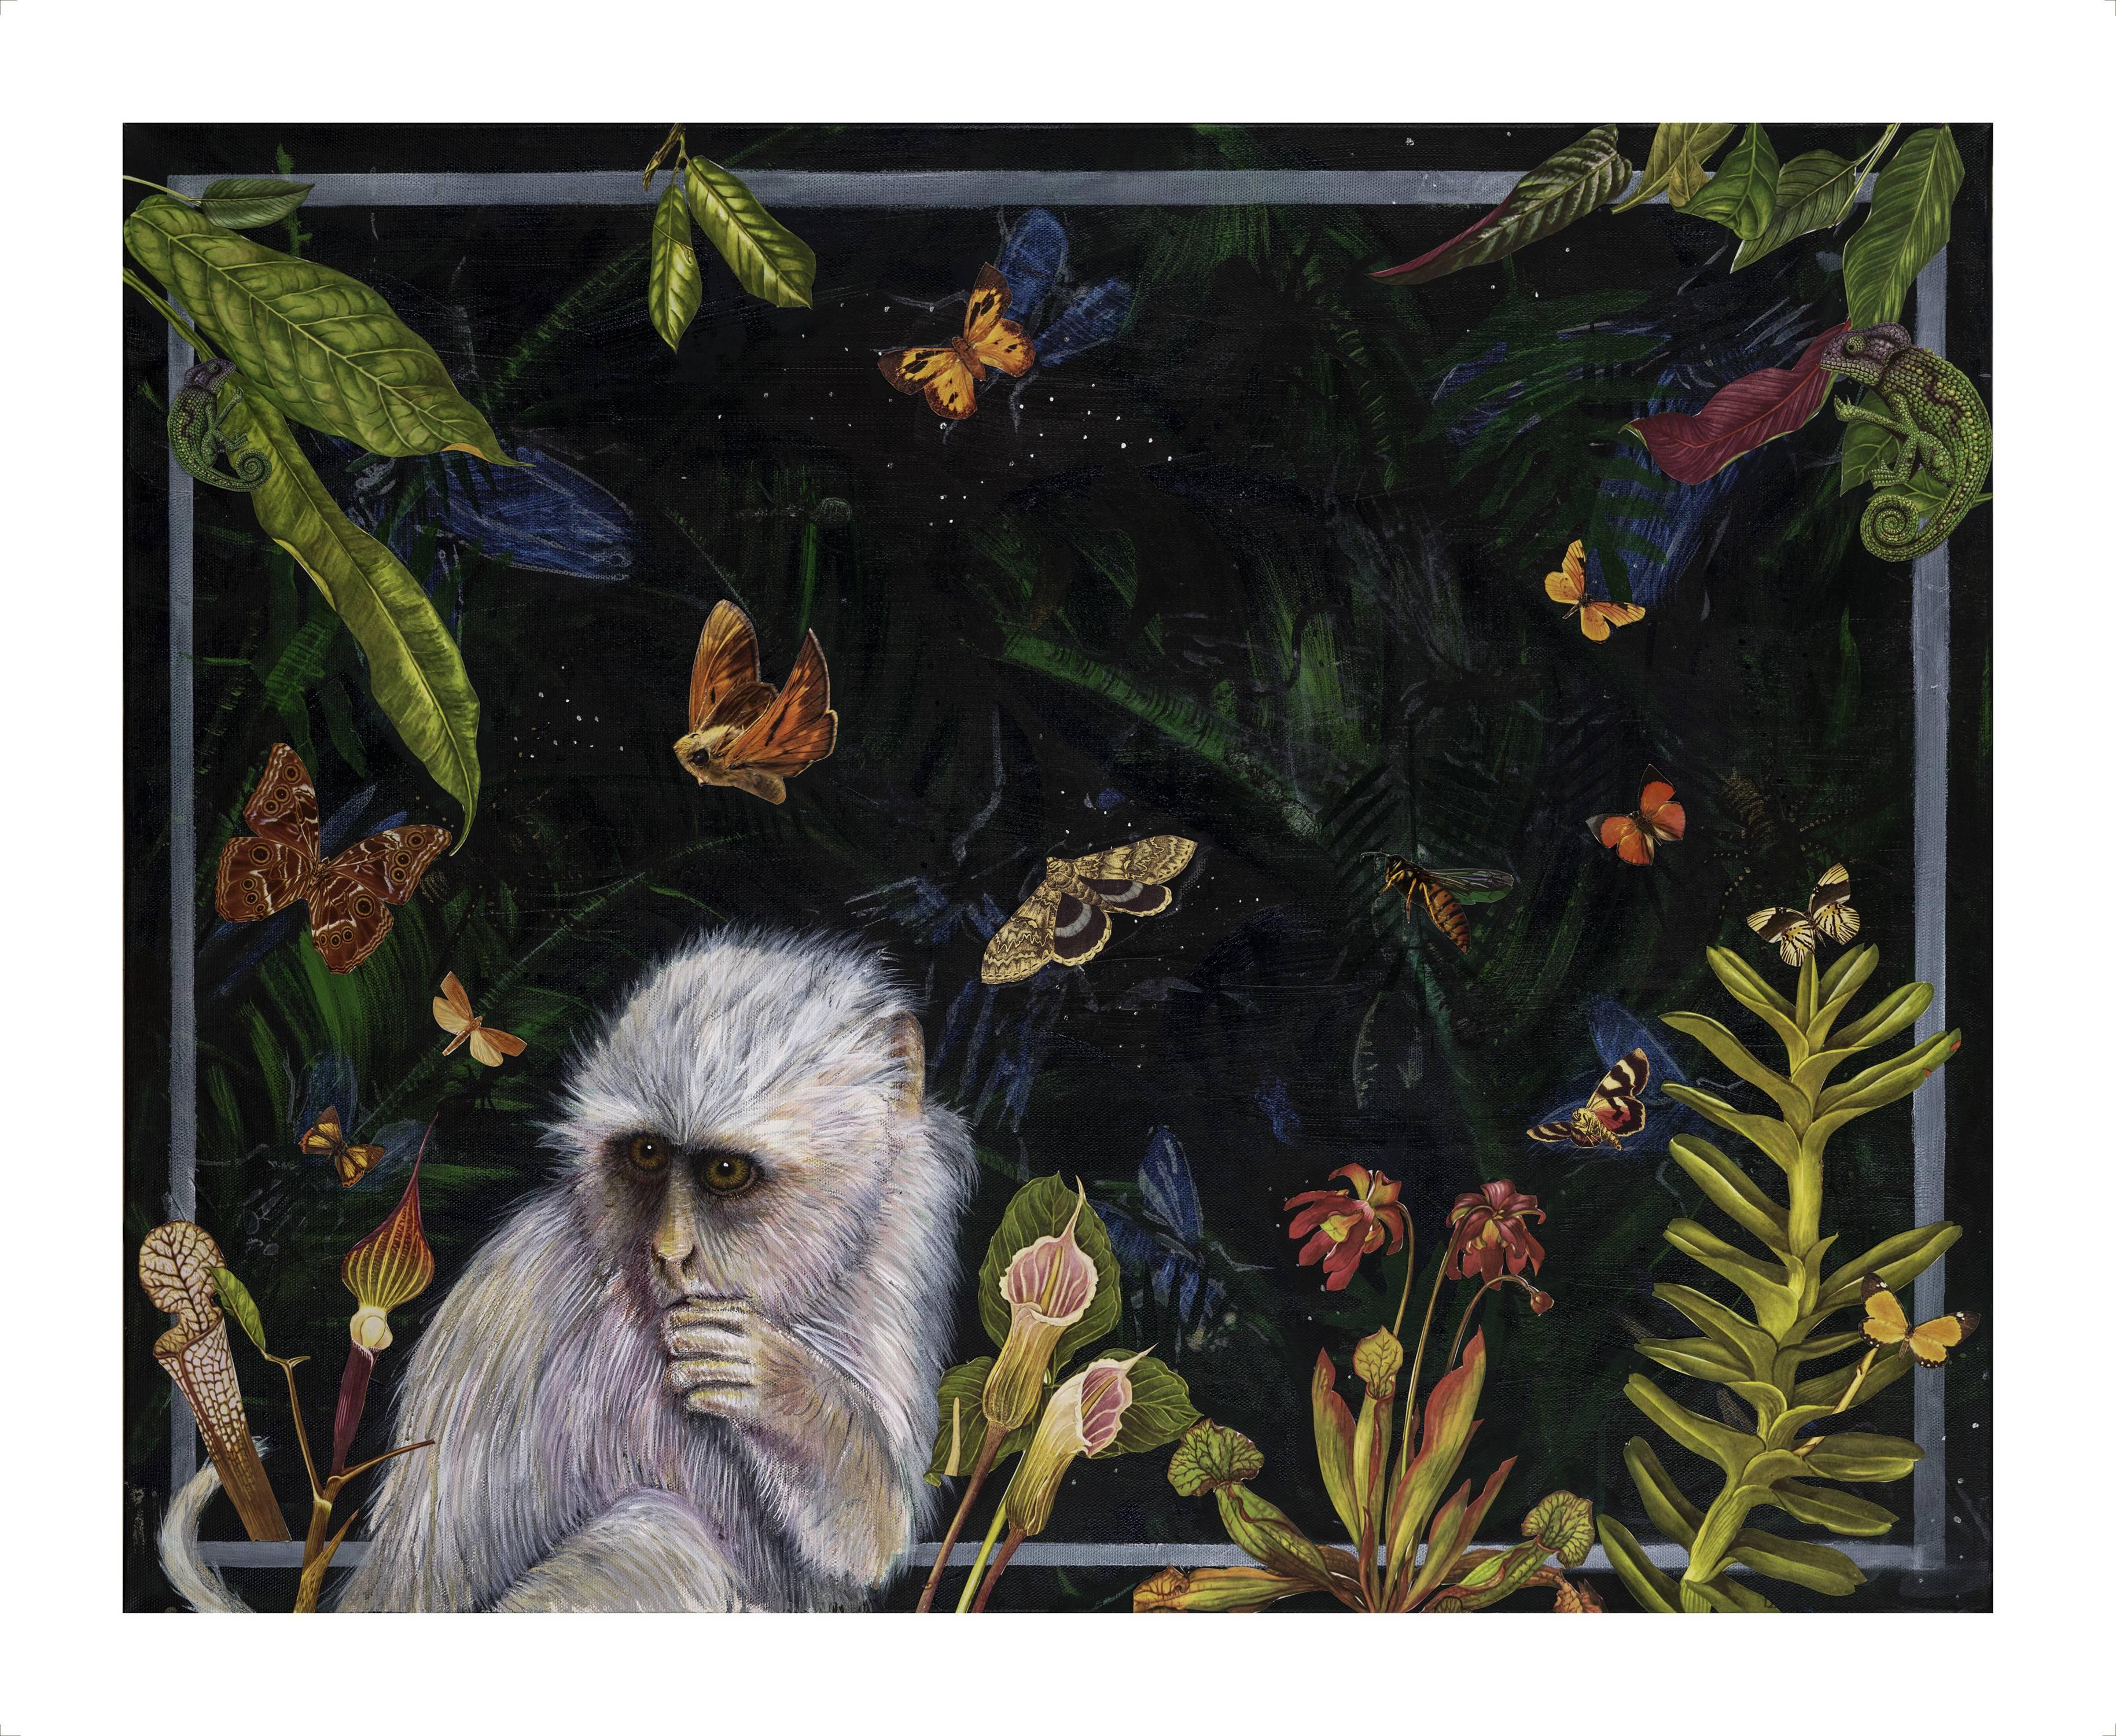 Jana Nicole Print - IN THE NIGHT GARDEN, Limited Edition of 10. Hand embellished with Color Pencil